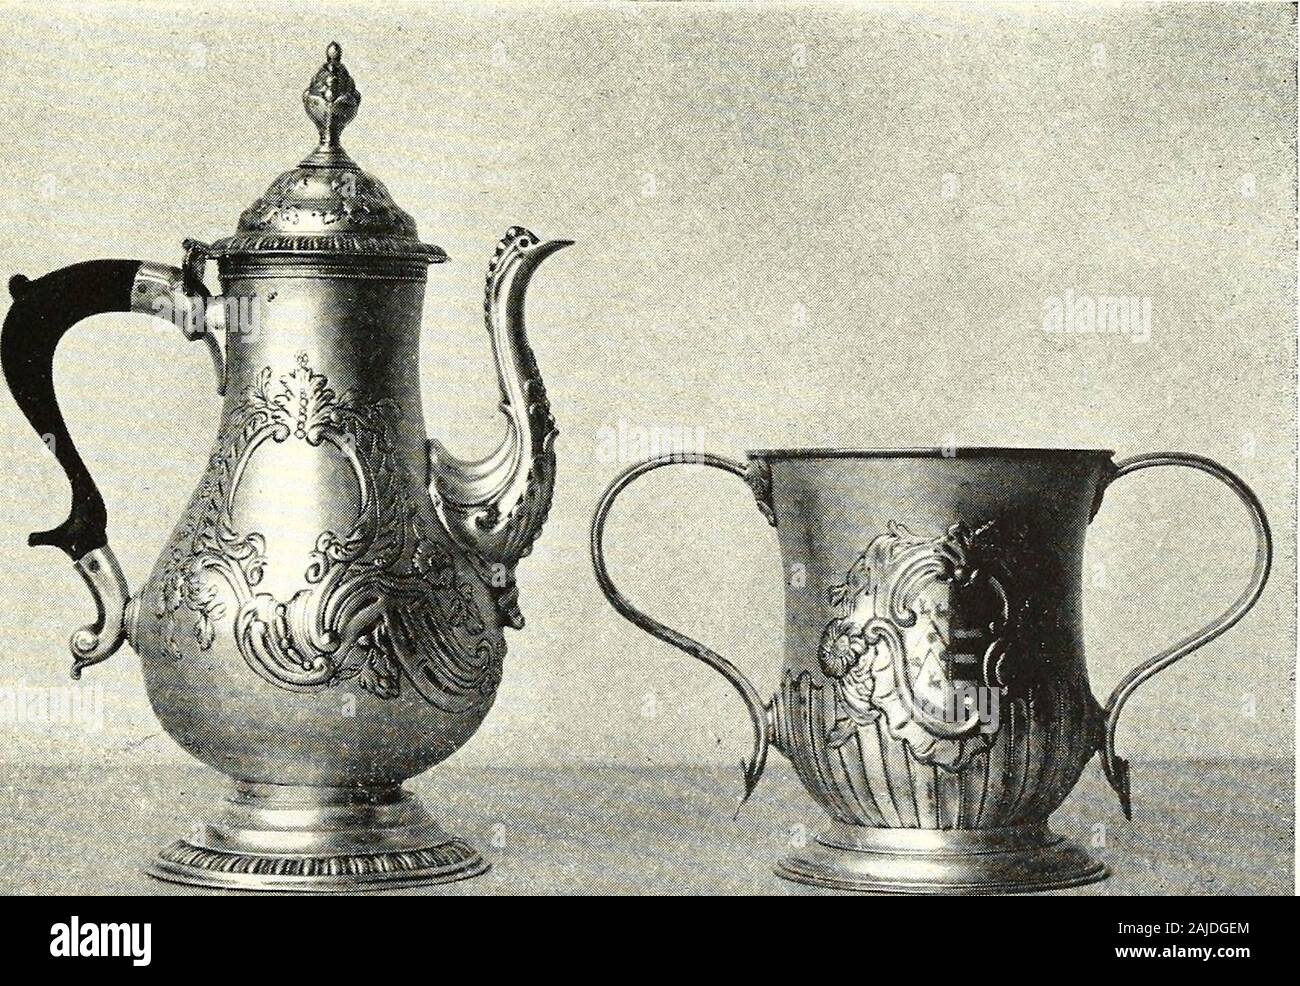 Pennsylvania Museum Bulletin Number 71, May 1922 . Patch-boxes of the Bolsover Period. Coffee Pot with Unidentified Marks, probably by M. Fextox & Co.Two-handled Cup, Lxidextified Stock Photo